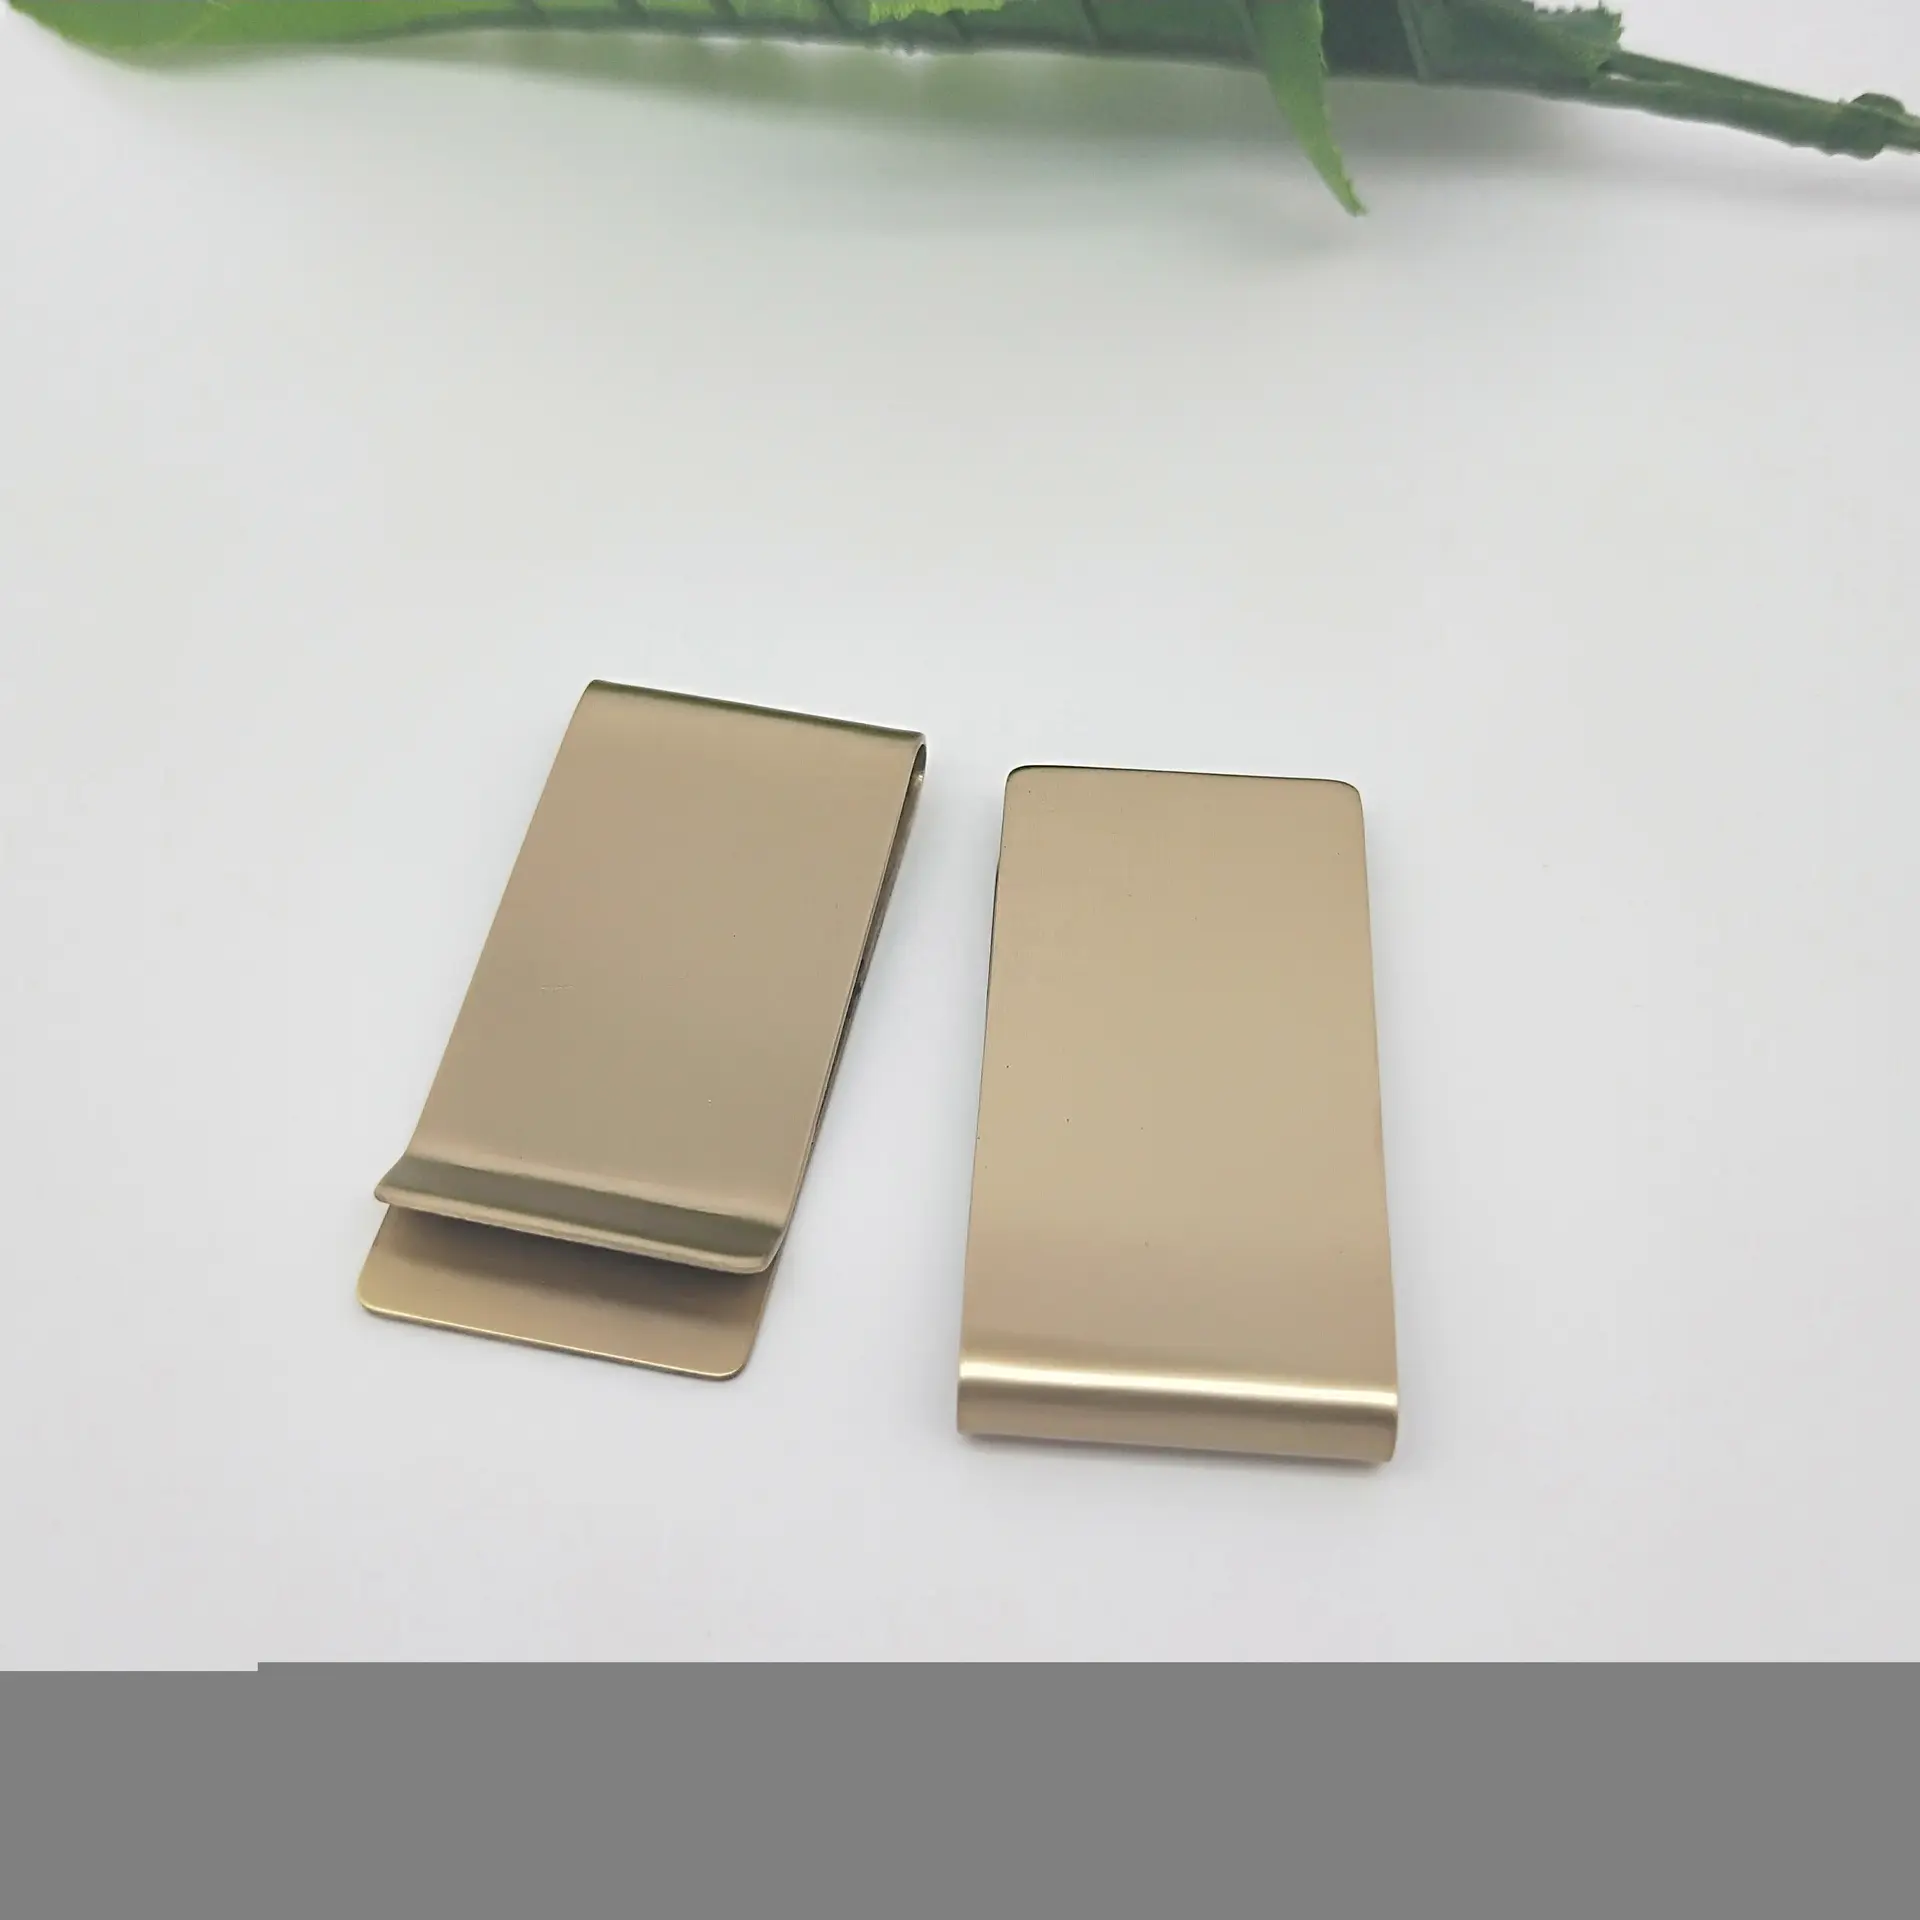 Factory direct sale cheap metal brass money clip with customized etched logo